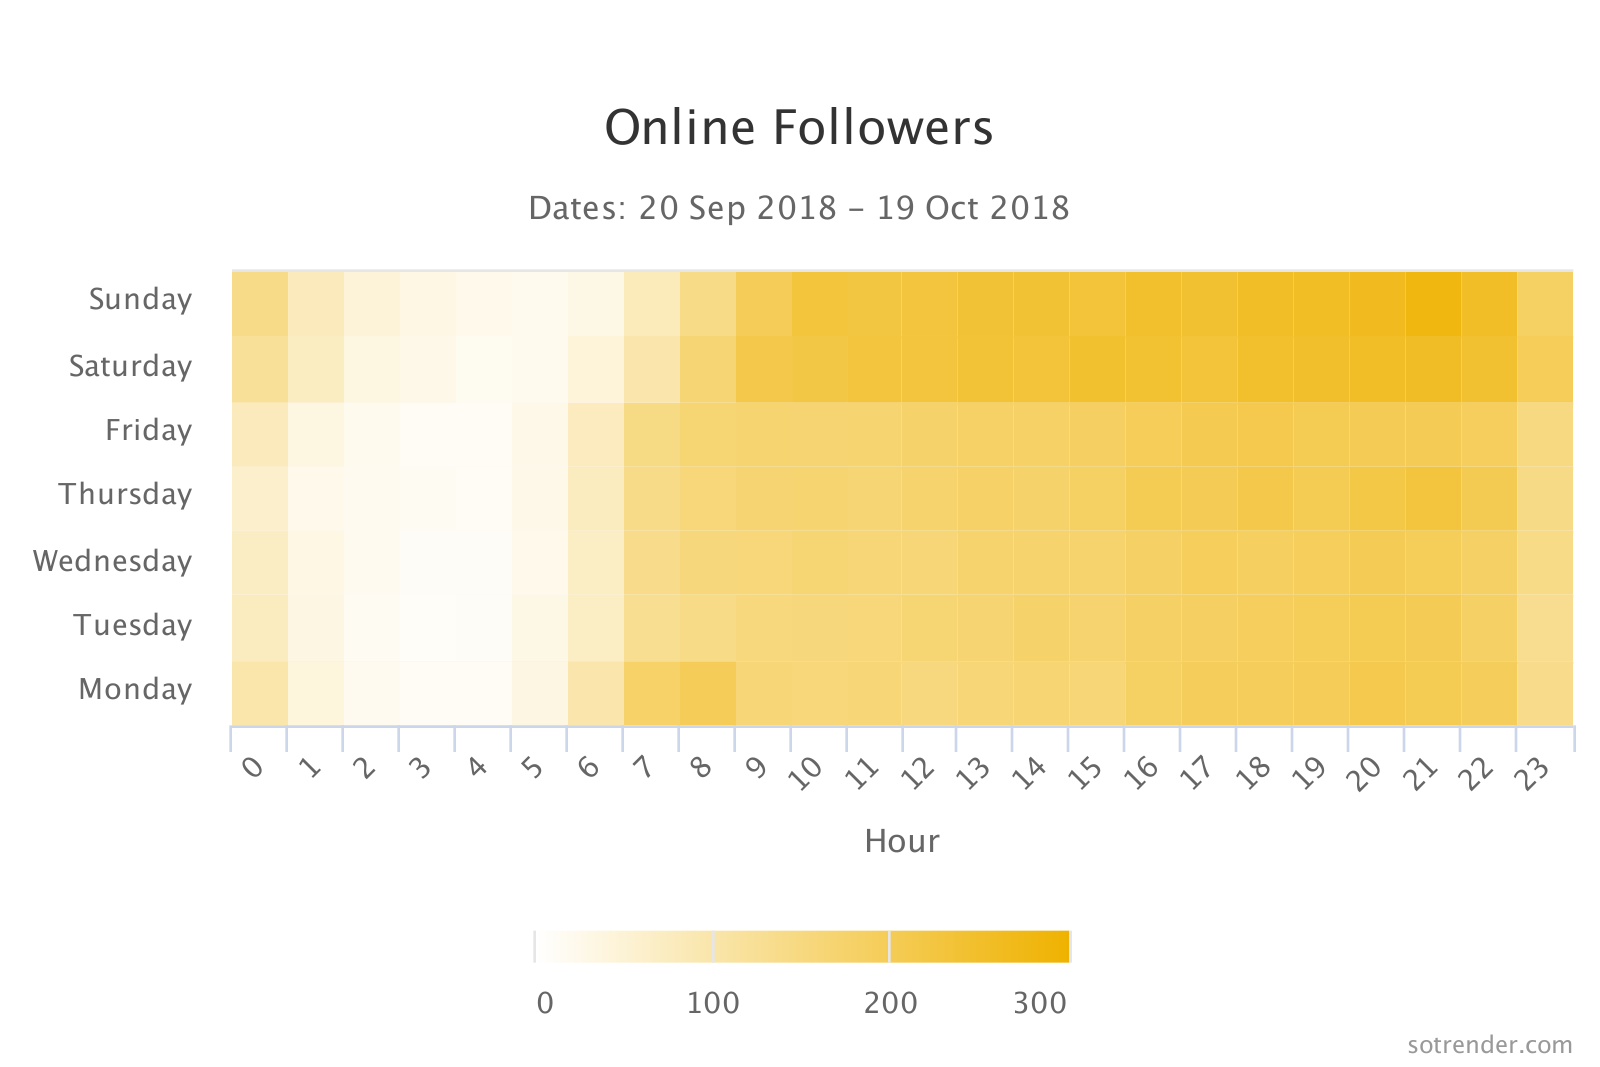 Online followers presented on a heat map